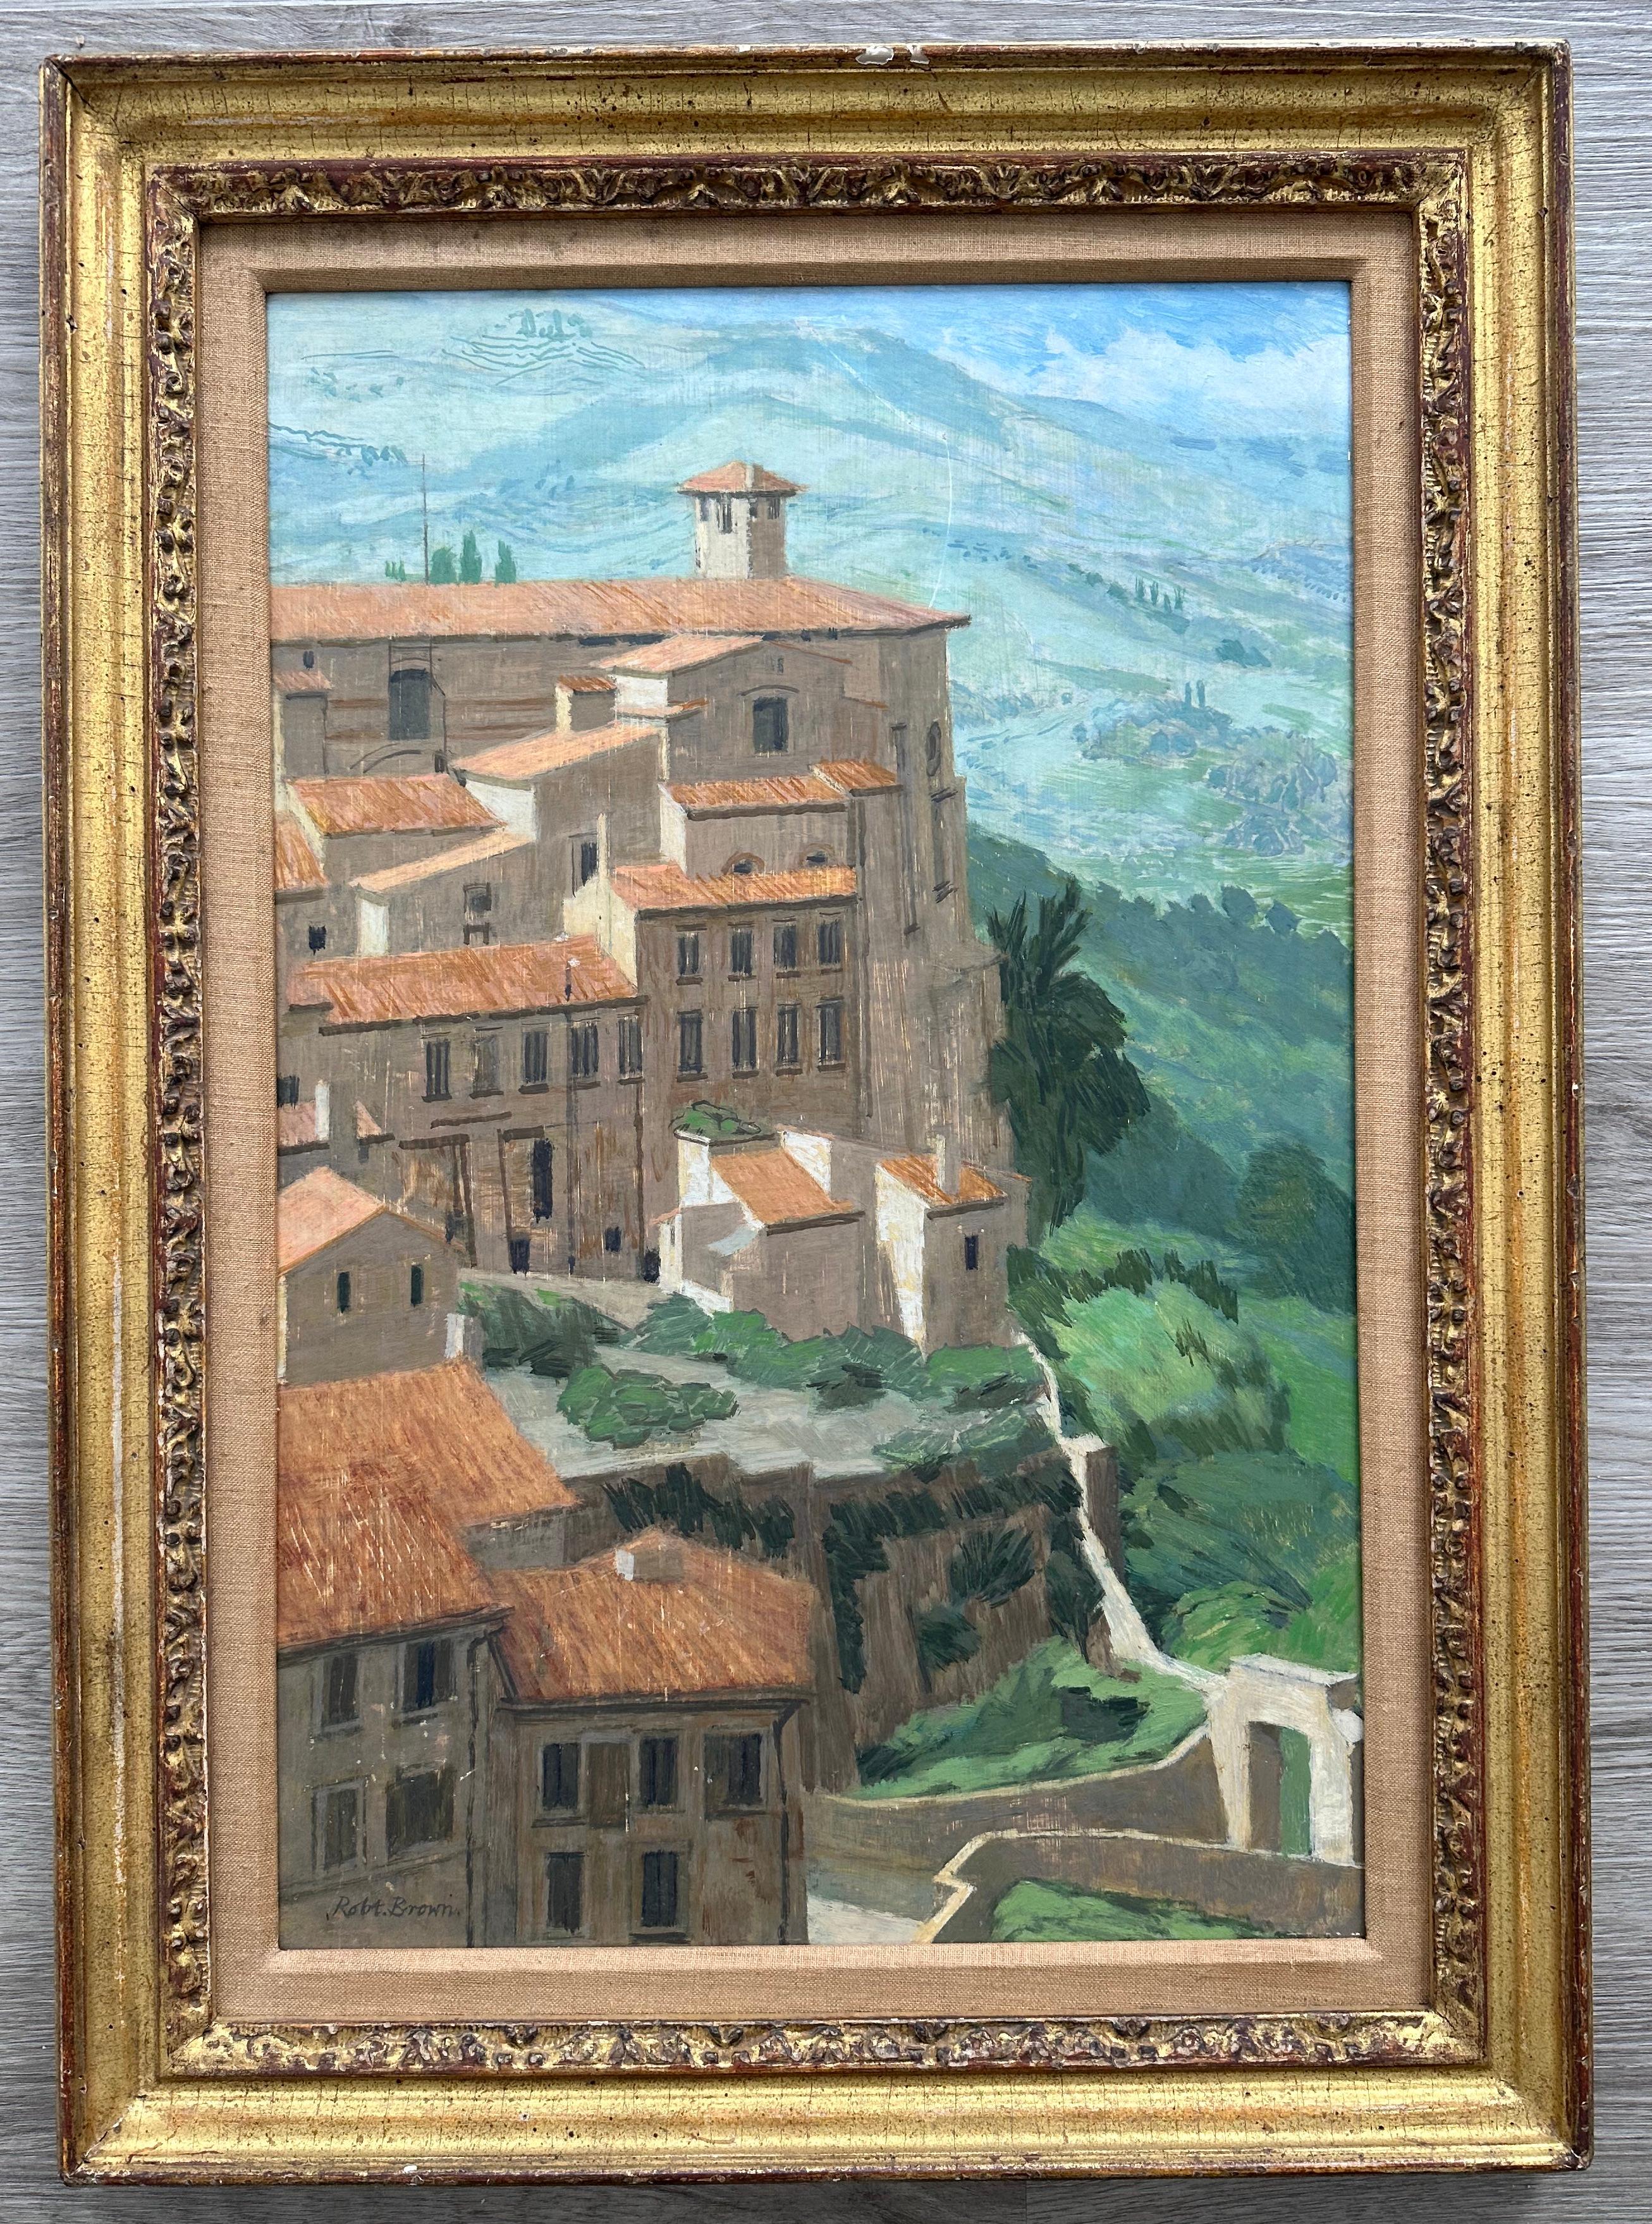 Robert Brown Landscape Painting - Perugia, Italy Landscape